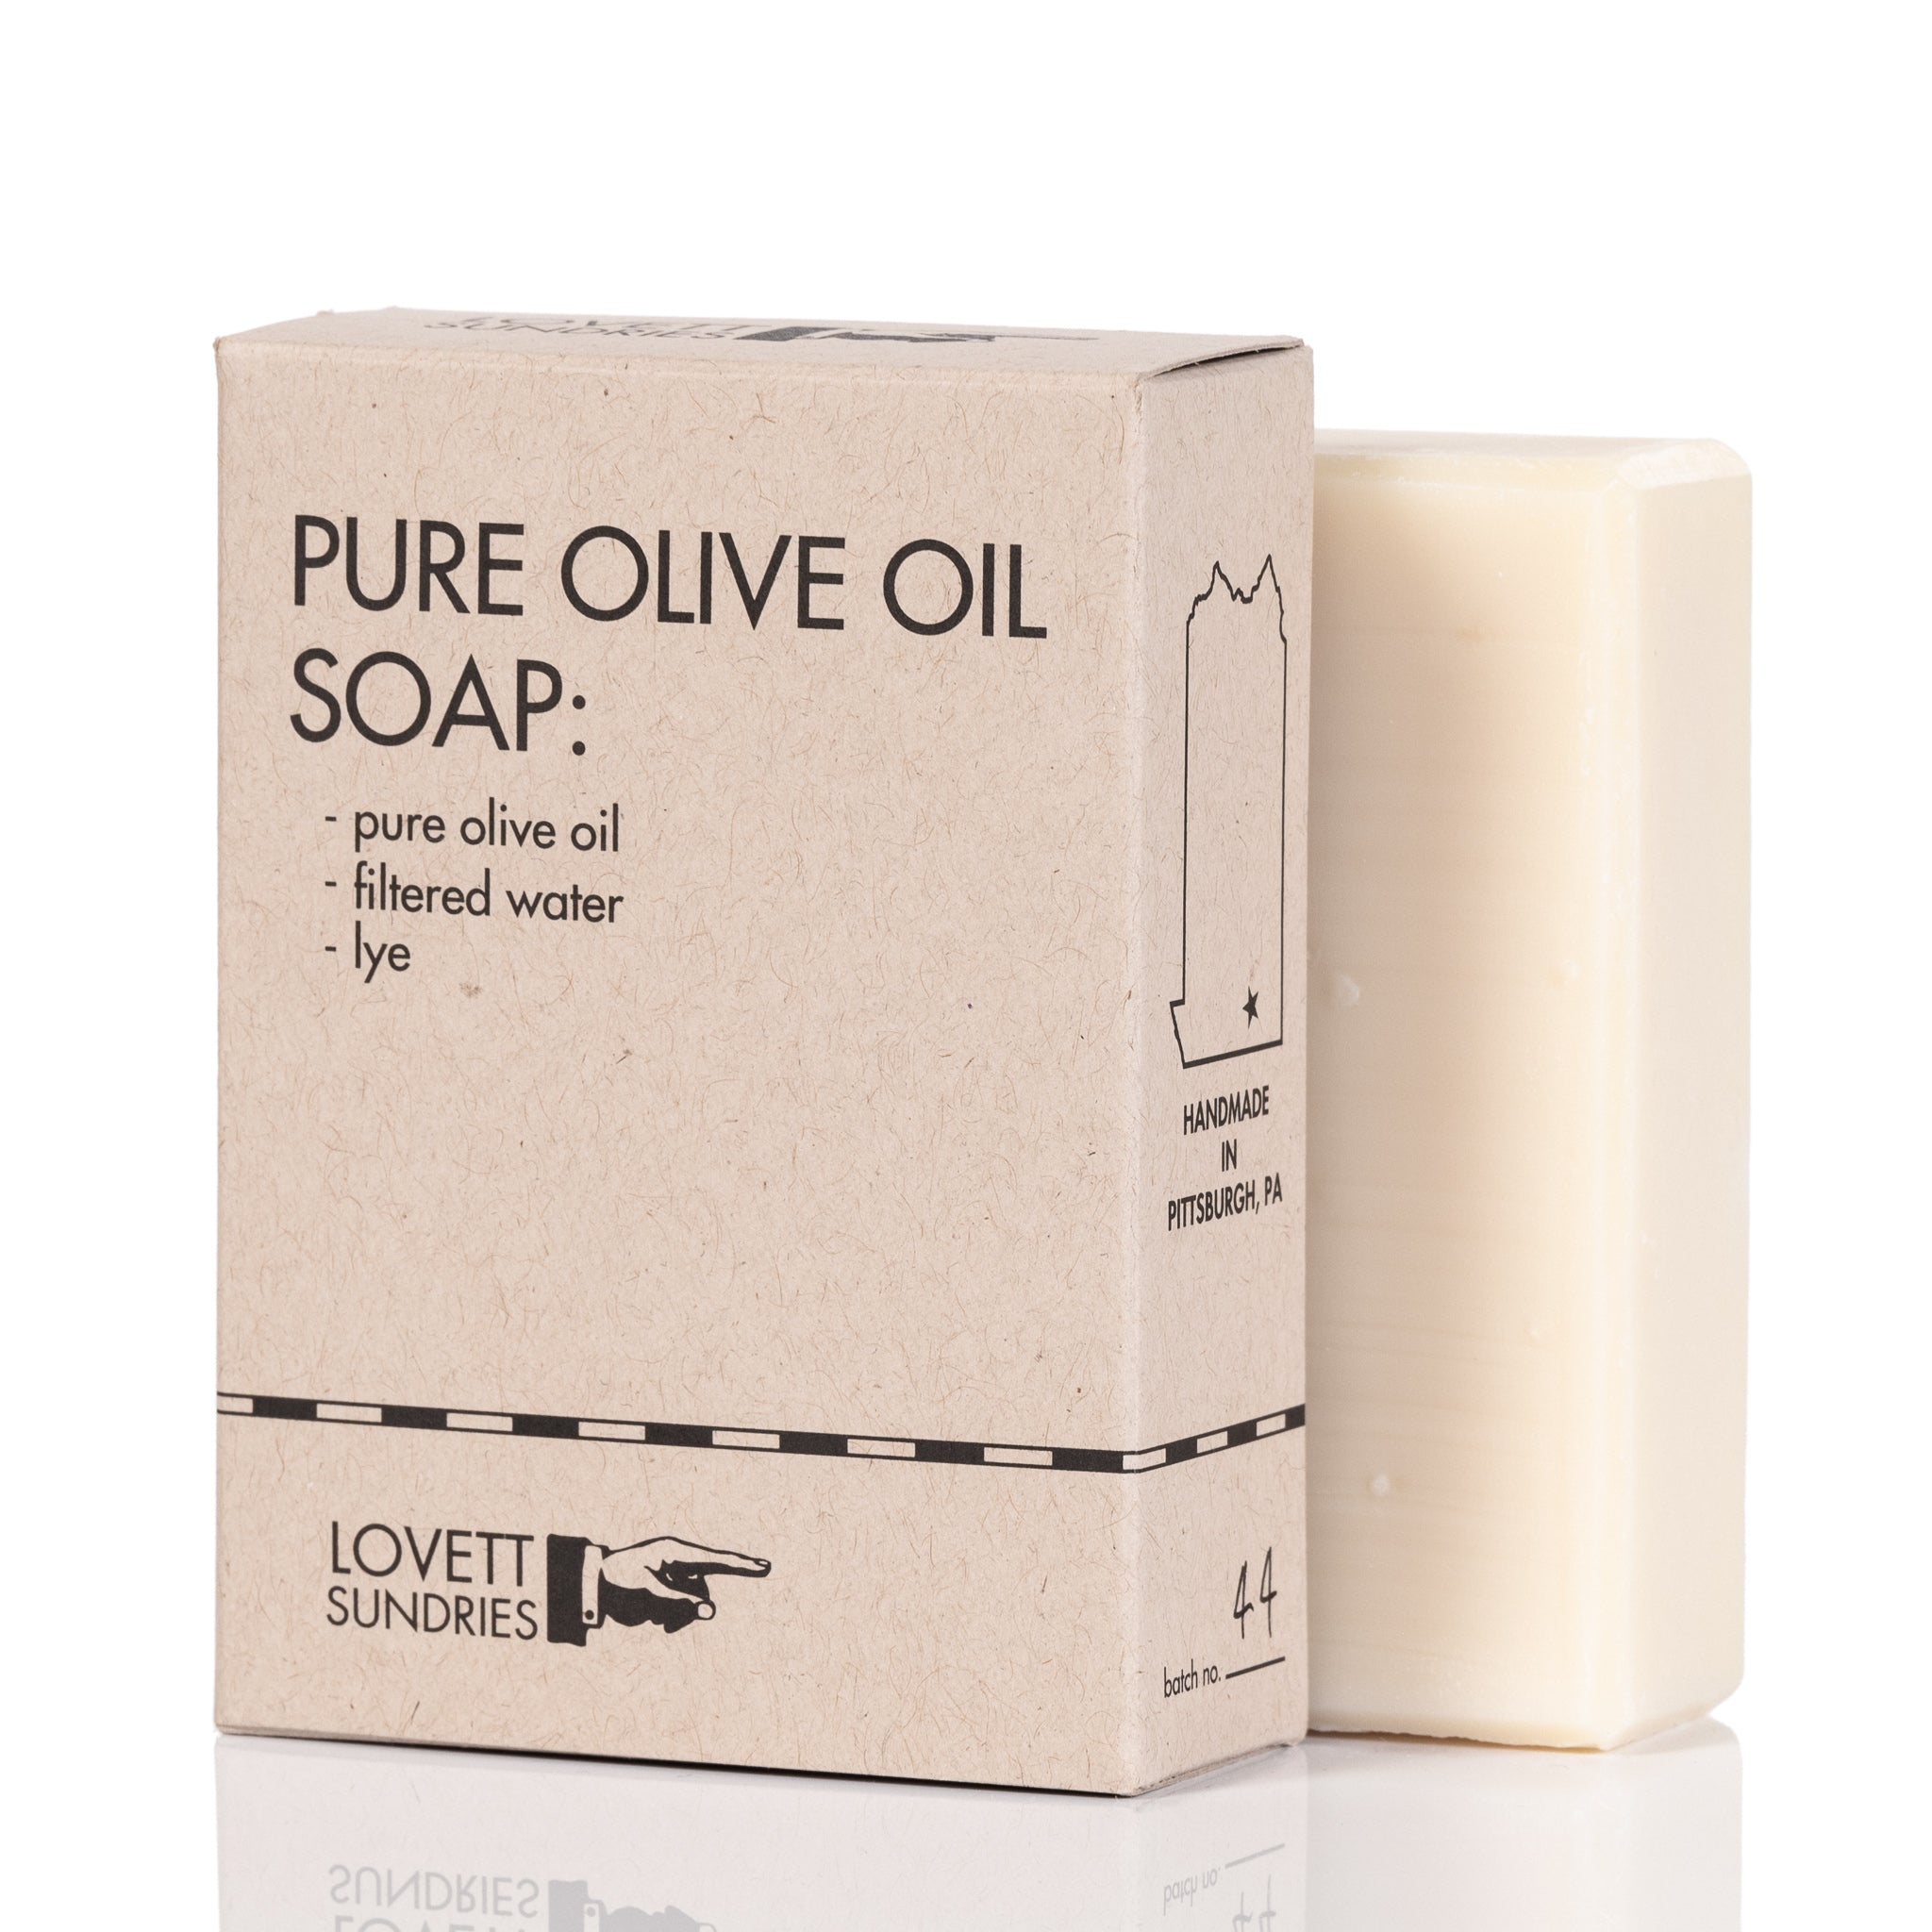 Pure olive oil soap bar in a biodegradable paper container.